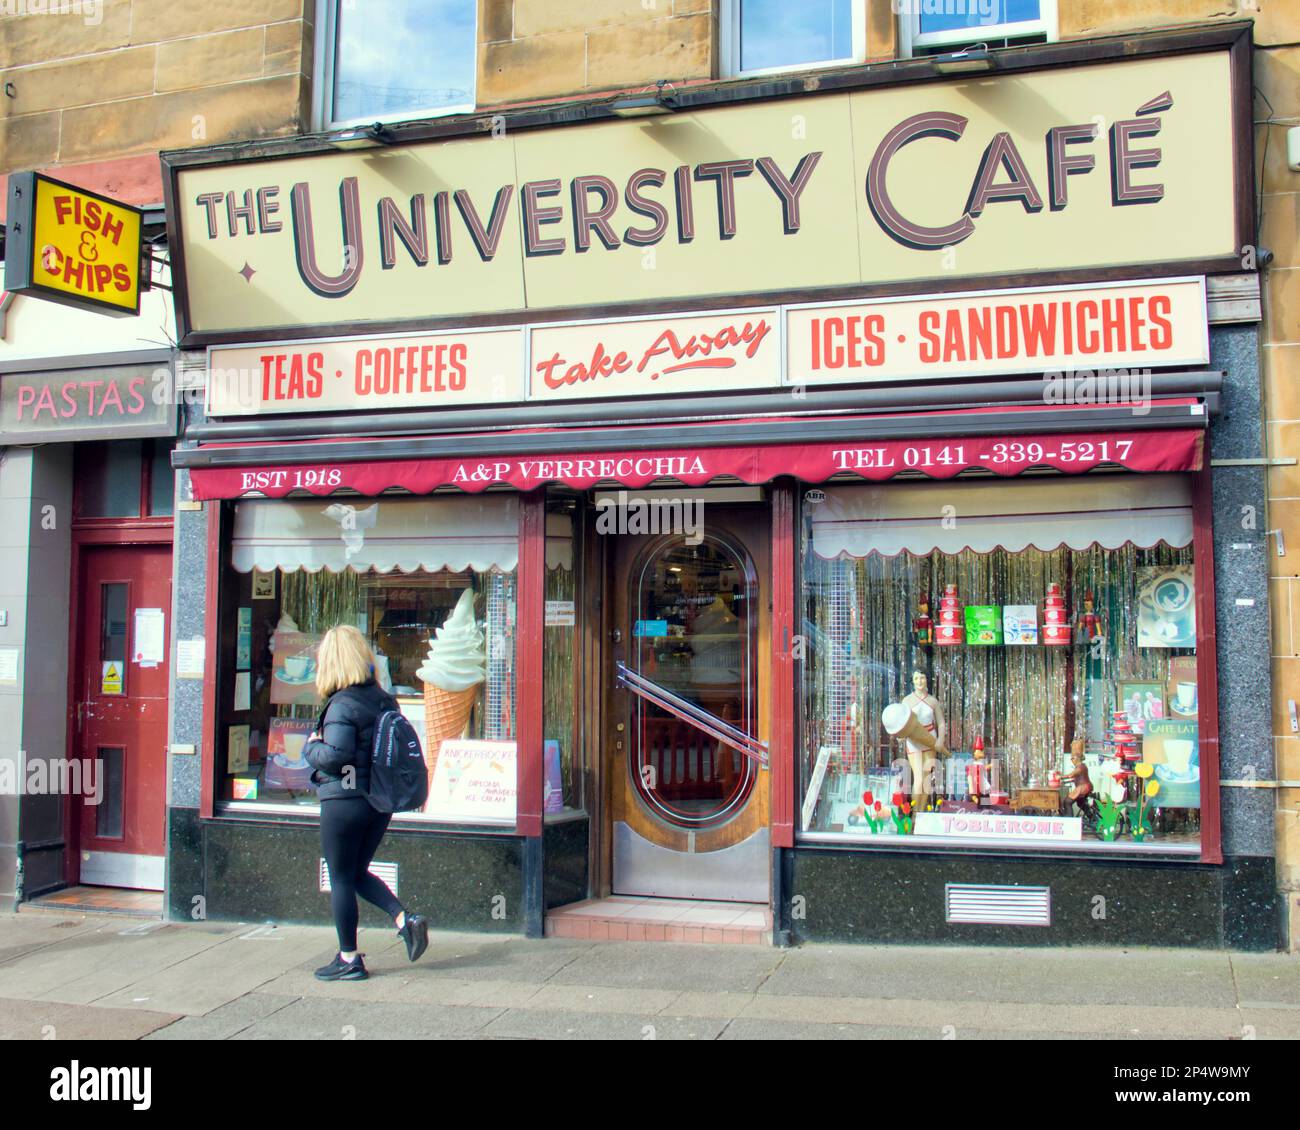 Glasgow, Scotland, UK 6th March, 2023. UK Weather:  Sunny start saw happier locals as the streets filled in the spring weather before the forecast return of winter.  The famous university cafe on byres road a popular destination for ice cream lovers in the sun. Credit Gerard Ferry/Alamy Live News Stock Photo